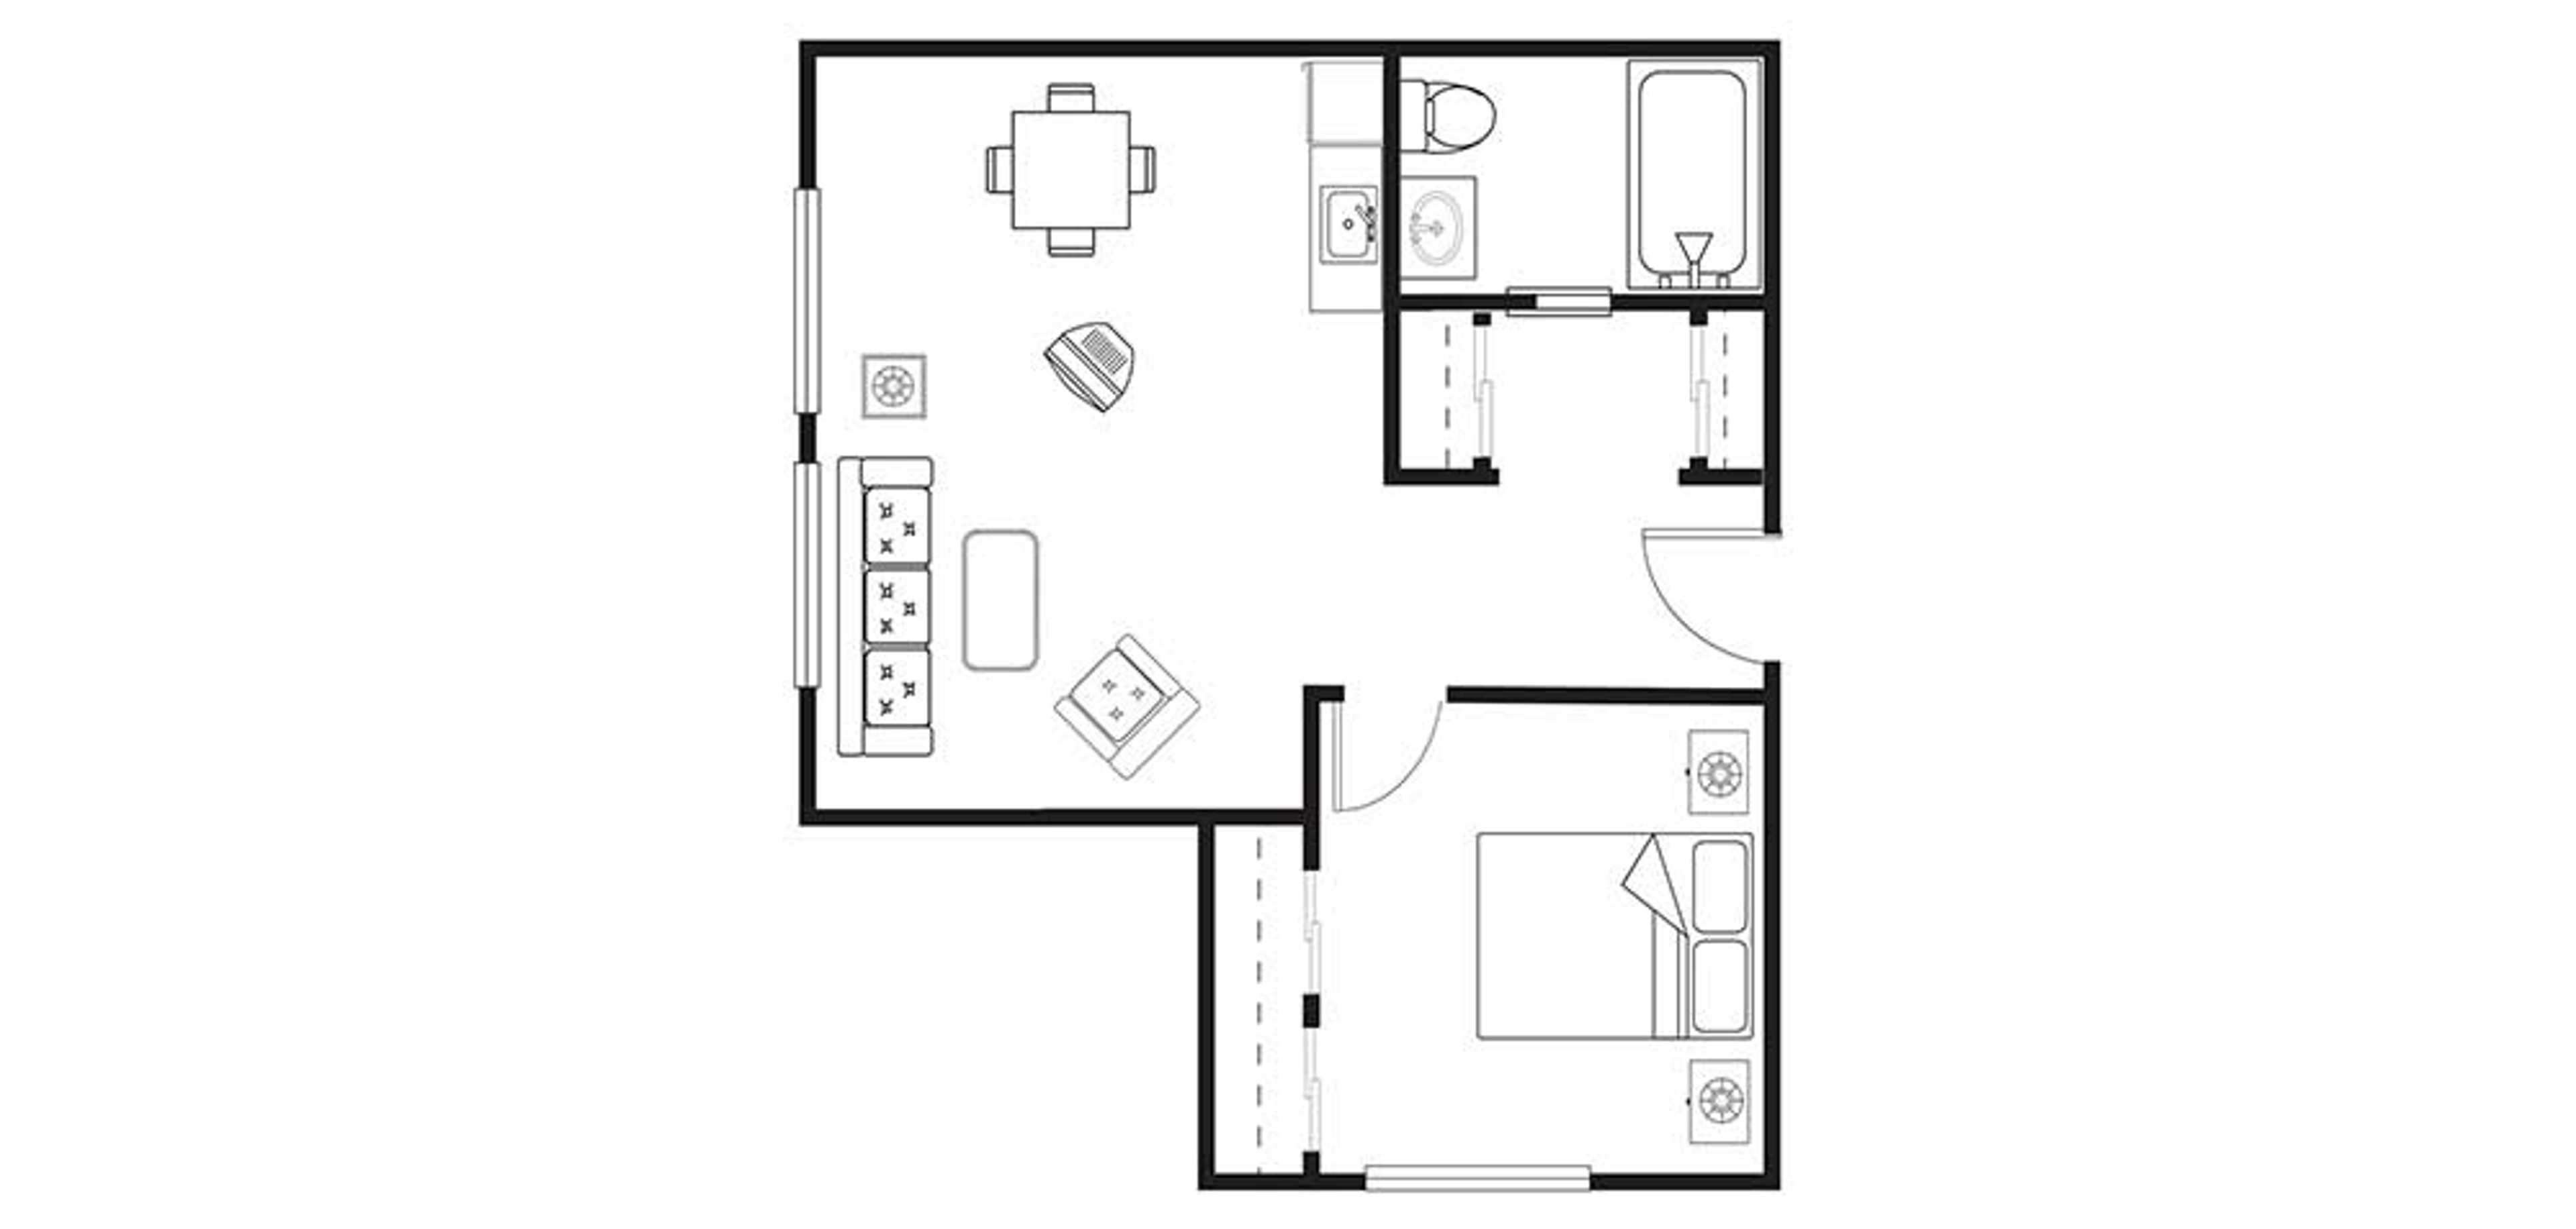 Floorplan - Redwood Heights - B1 One Bedroom 627 sq. ft. Assisted Living